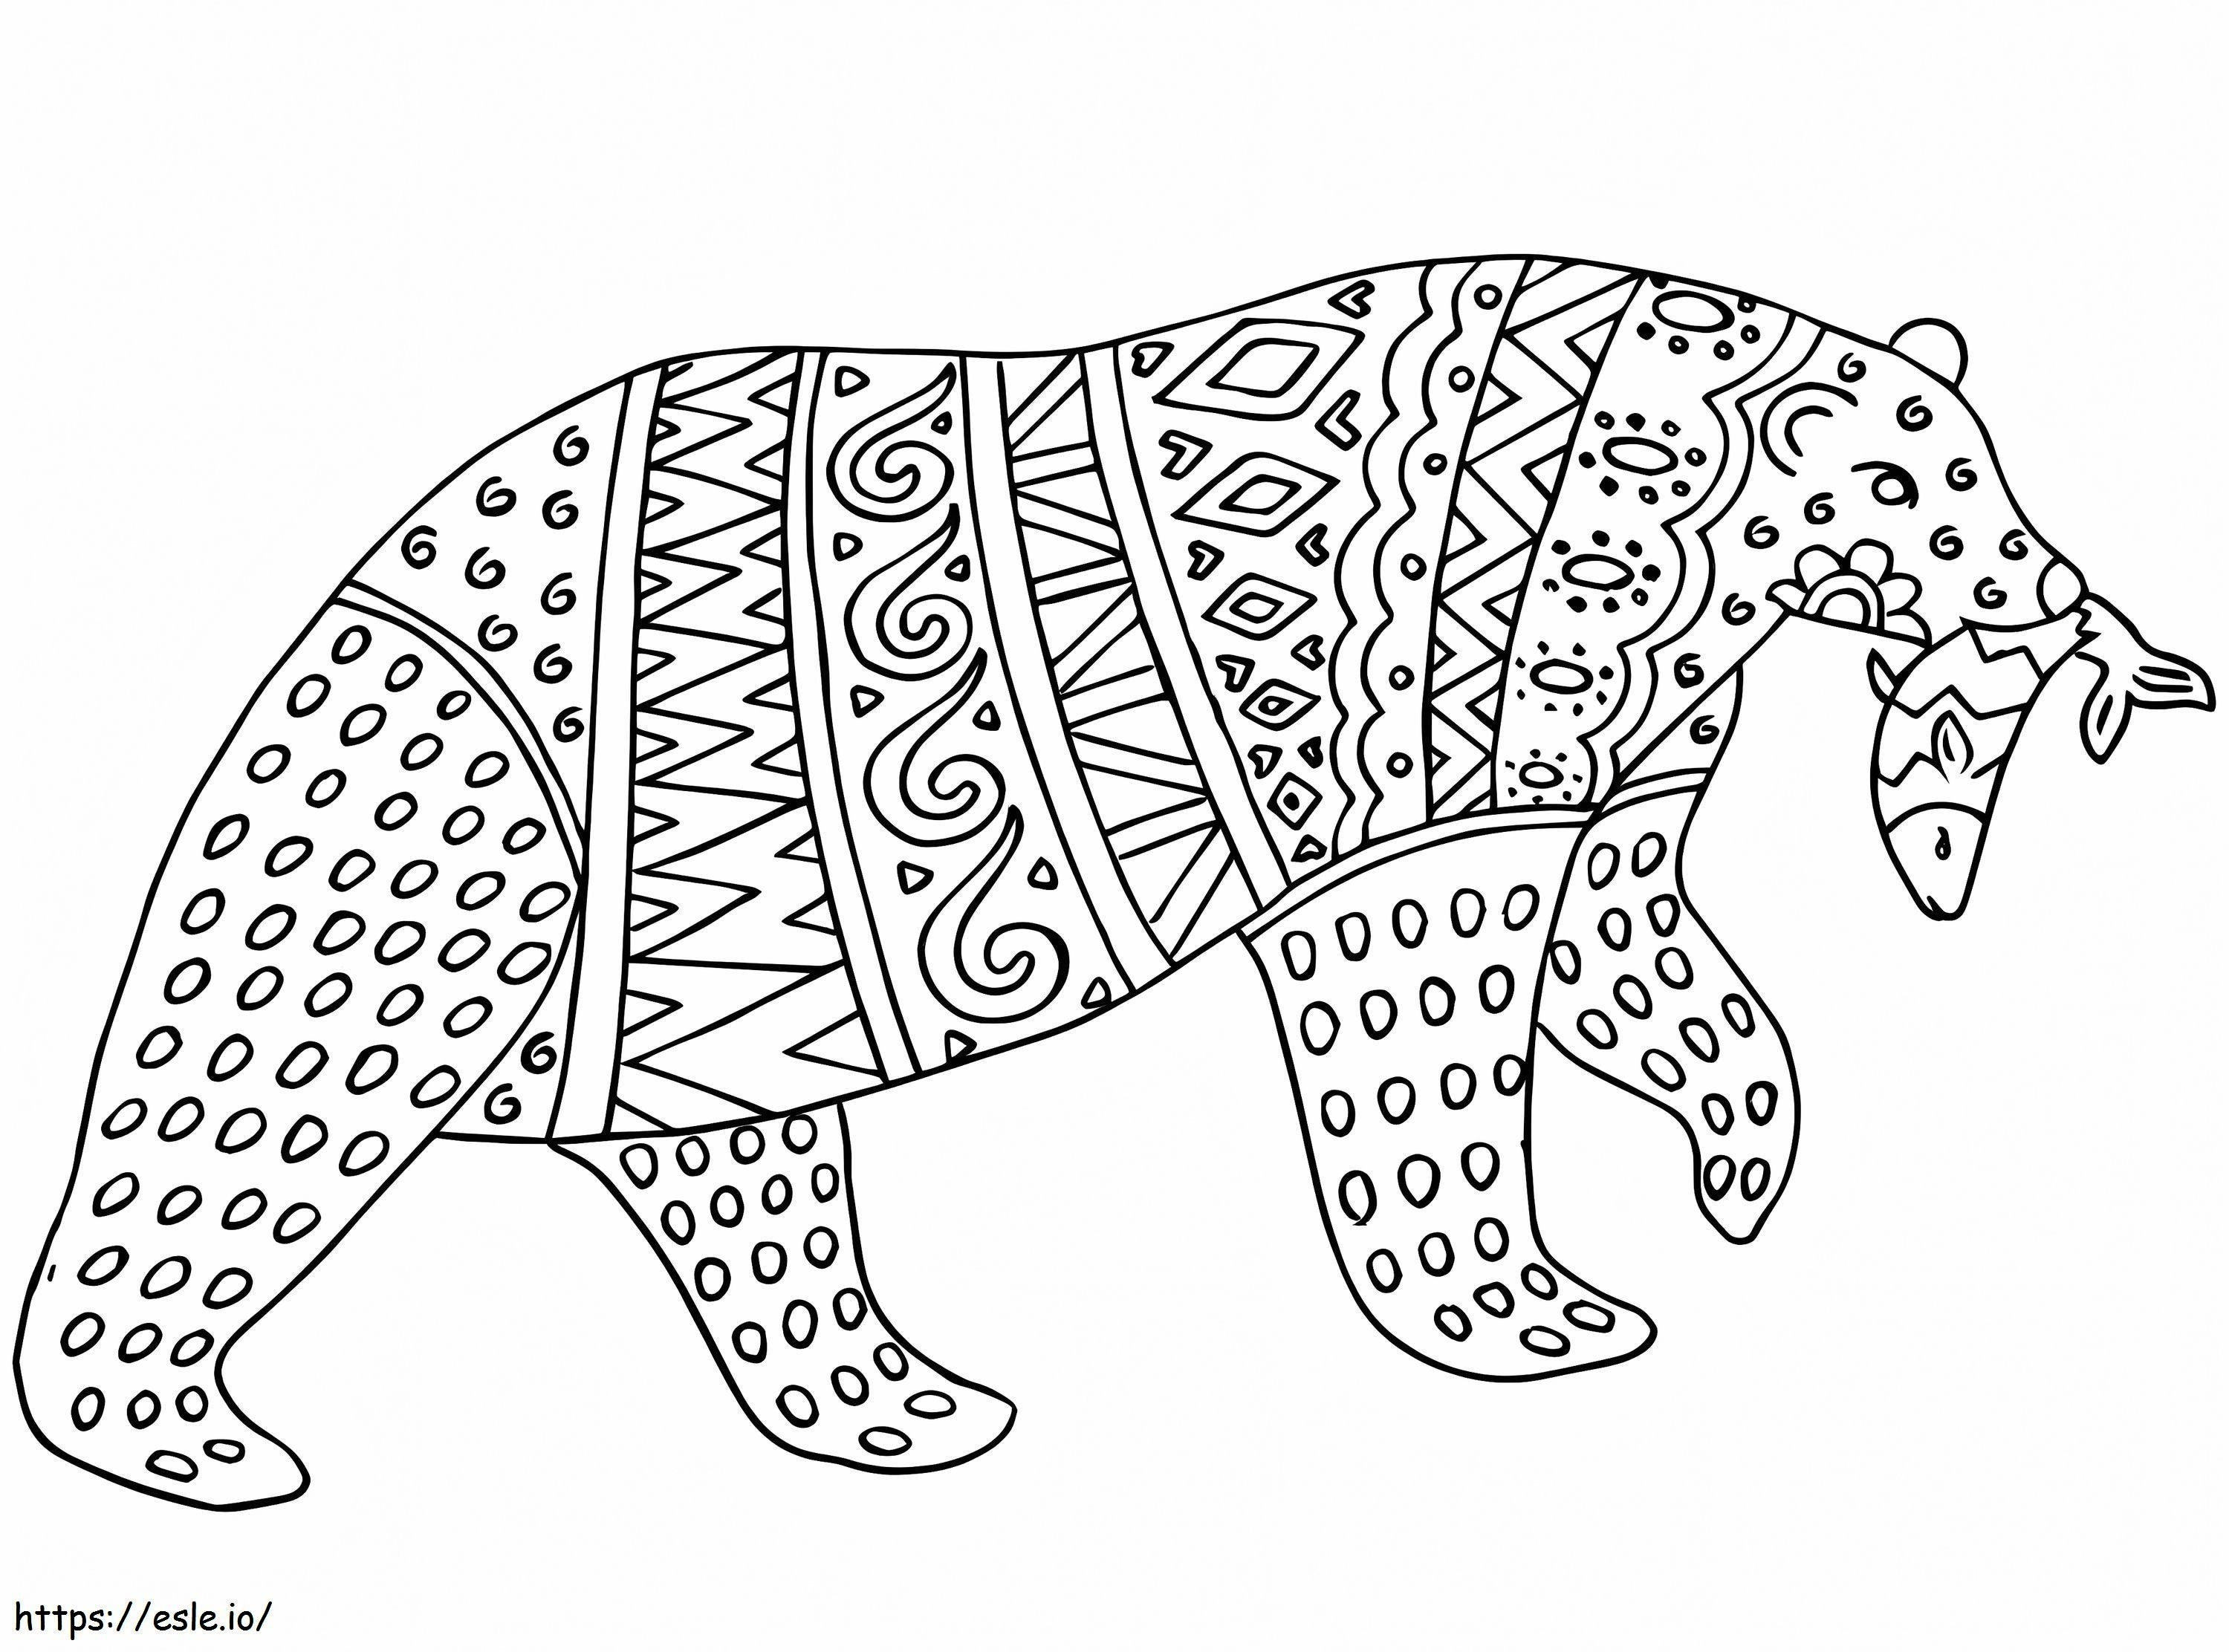 Bear With Fish Alebrijes coloring page